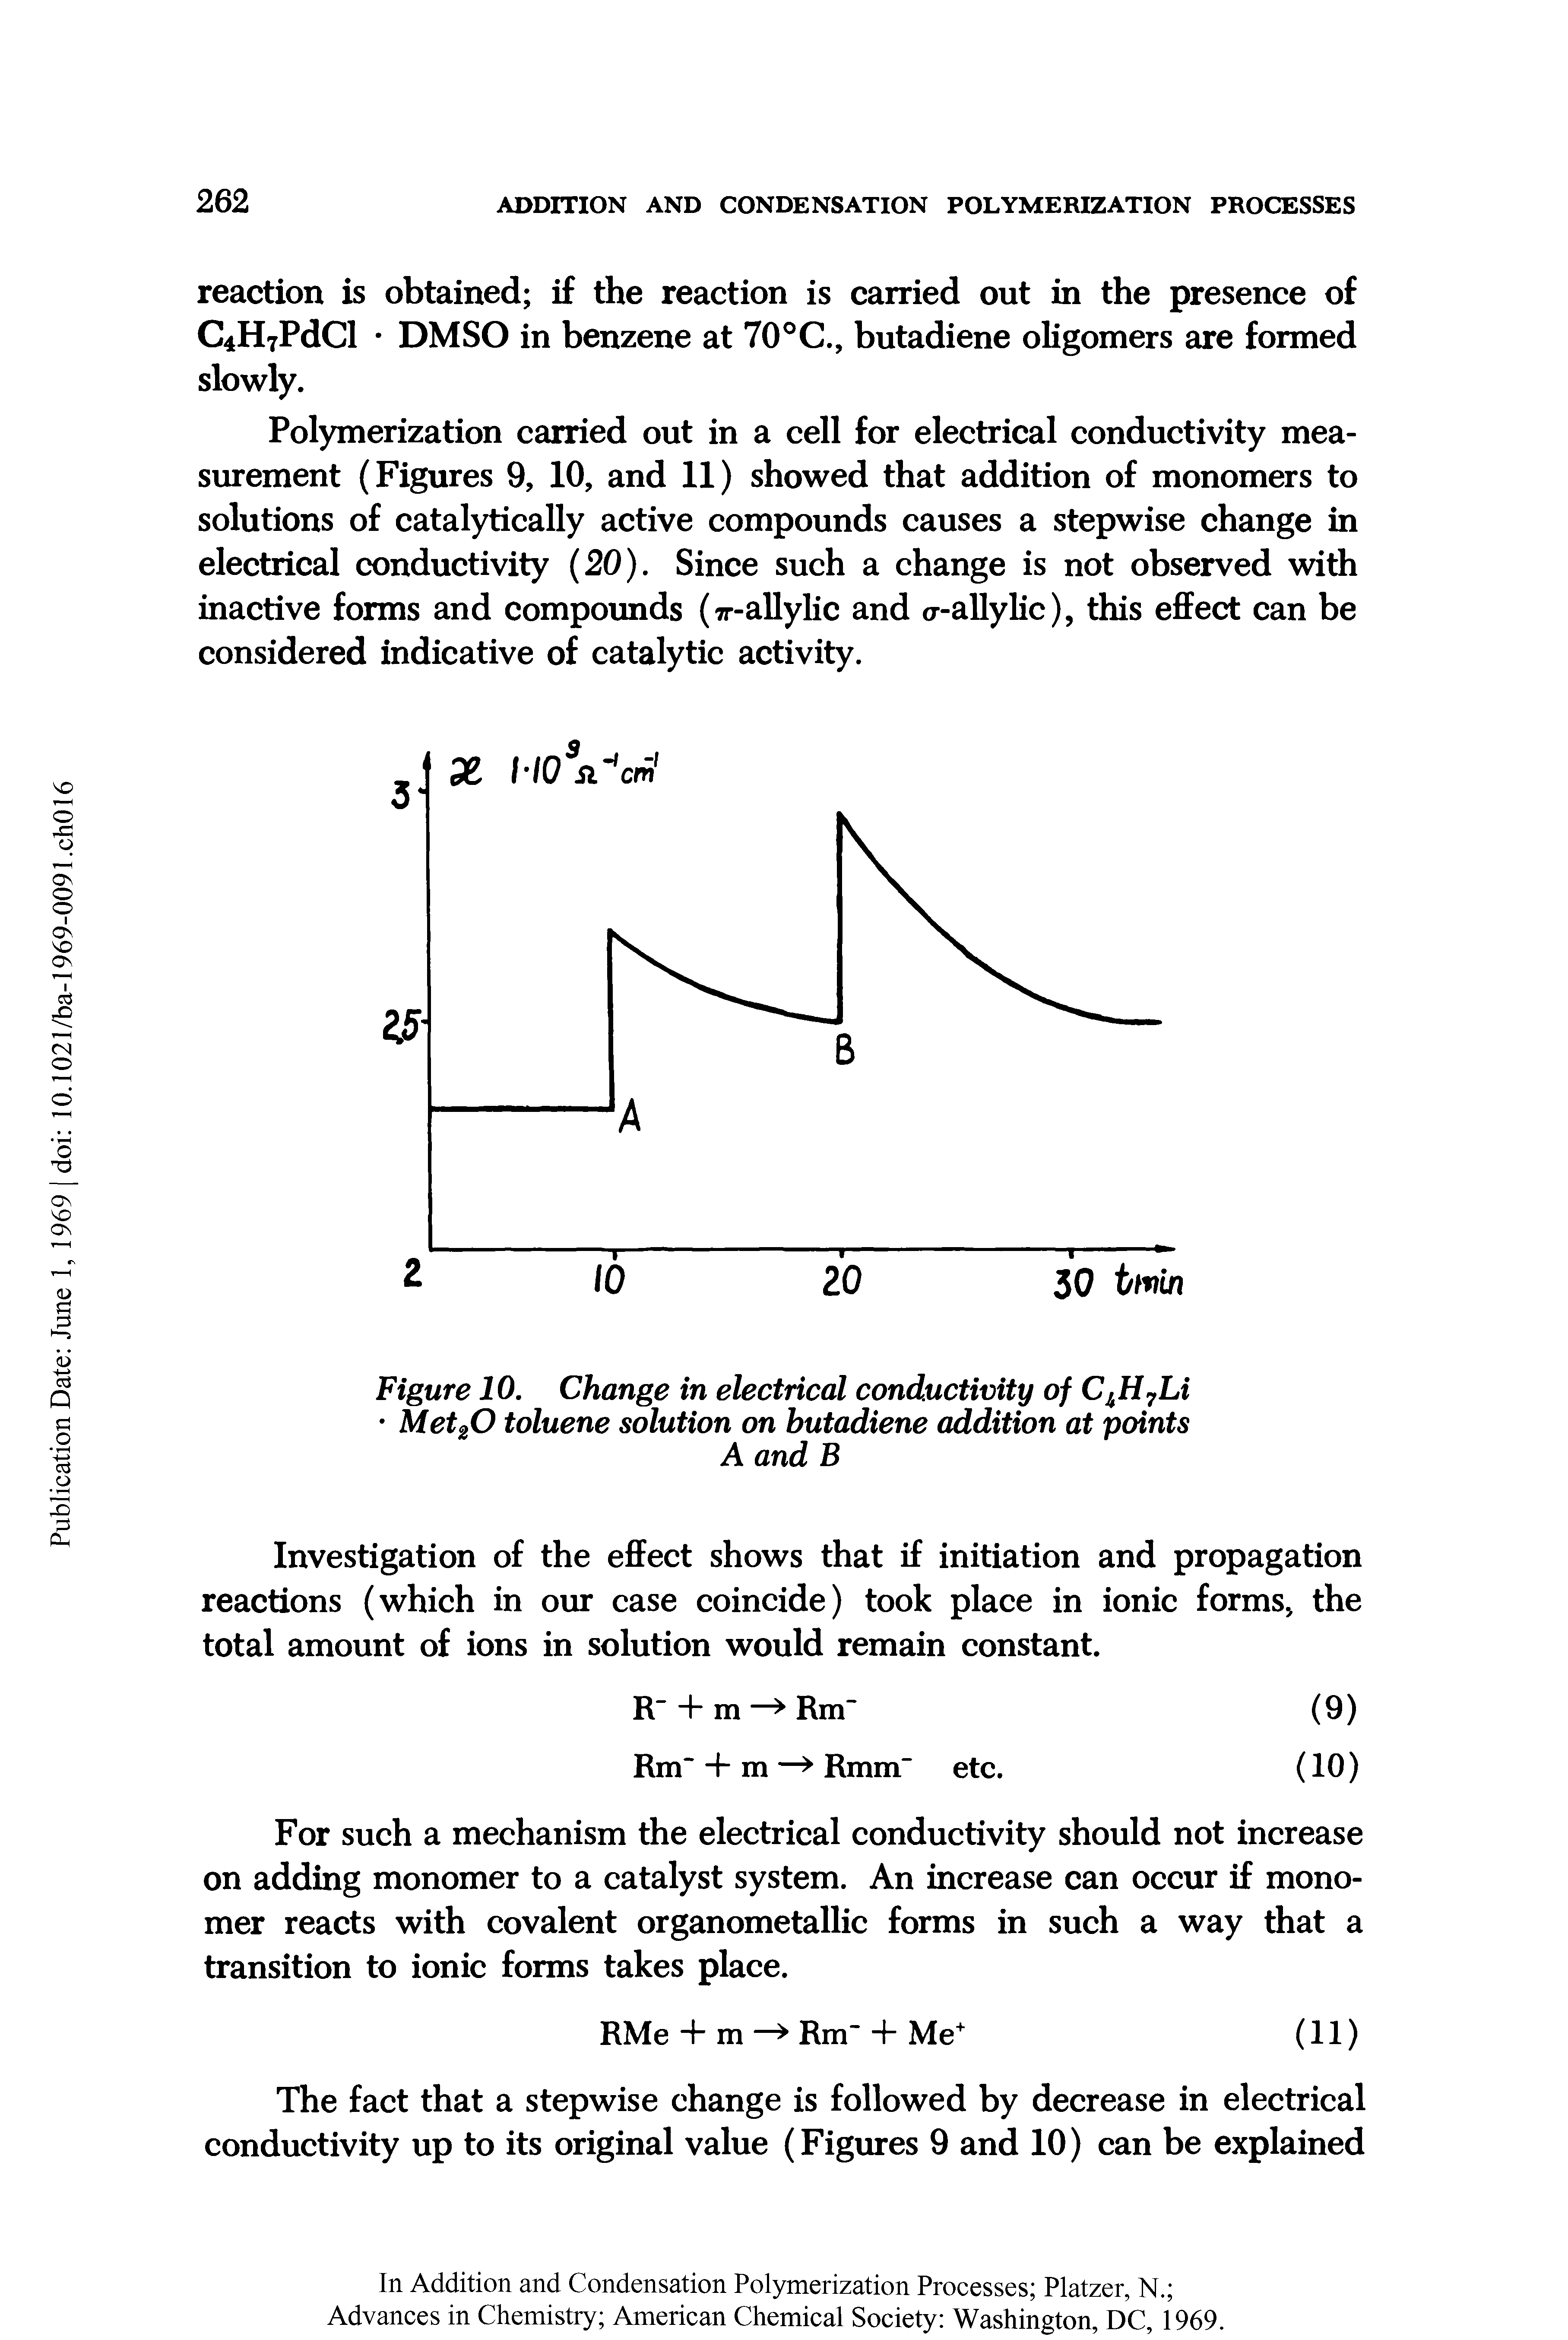 Figure 10. Change in electrical conductivity of ChH7Li Met20 toluene solution on butadiene addition at points A and B...